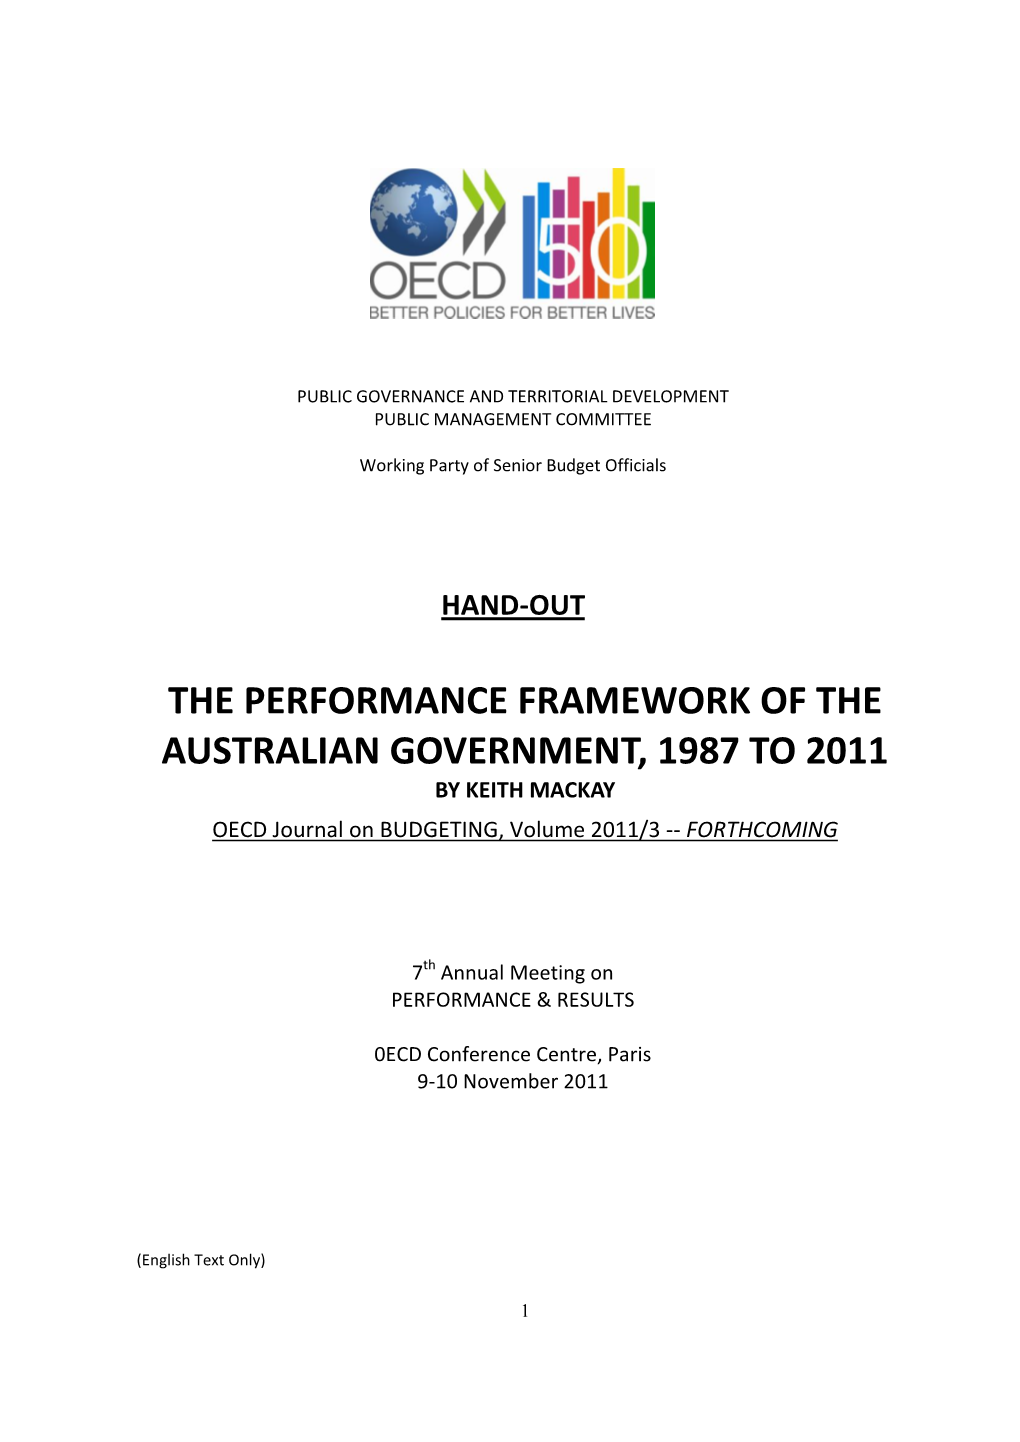 THE PERFORMANCE FRAMEWORK of the AUSTRALIAN GOVERNMENT, 1987 to 2011 by KEITH MACKAY OECD Journal on BUDGETING, Volume 2011/3 -- FORTHCOMING